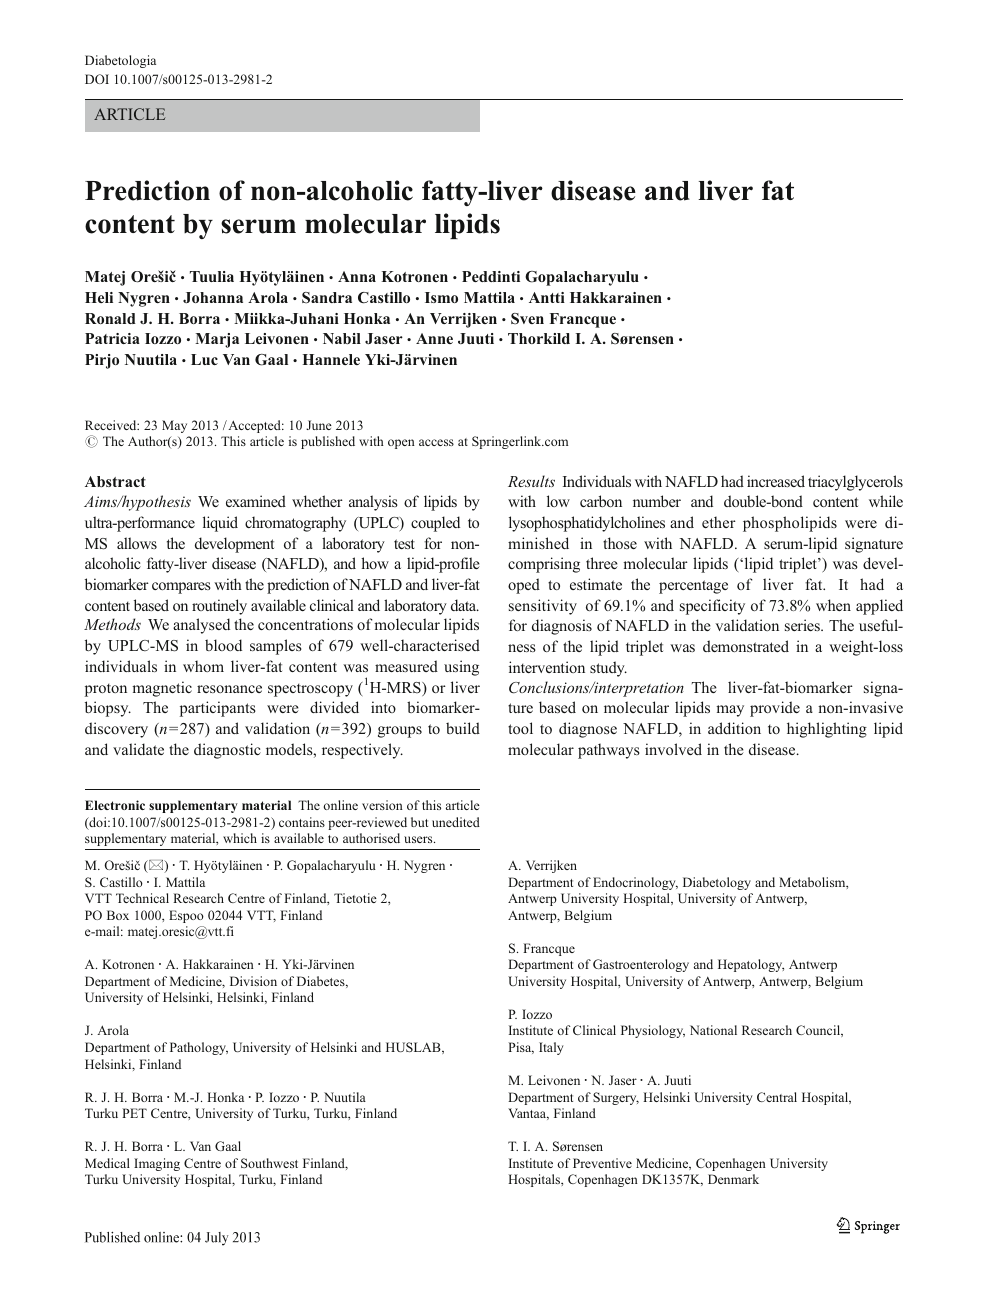 Prediction Of Non Alcoholic Fatty Liver Disease And Liver Fat Content By Serum Molecular Lipids Topic Of Research Paper In Biological Sciences Download Scholarly Article Pdf And Read For Free On Cyberleninka Open